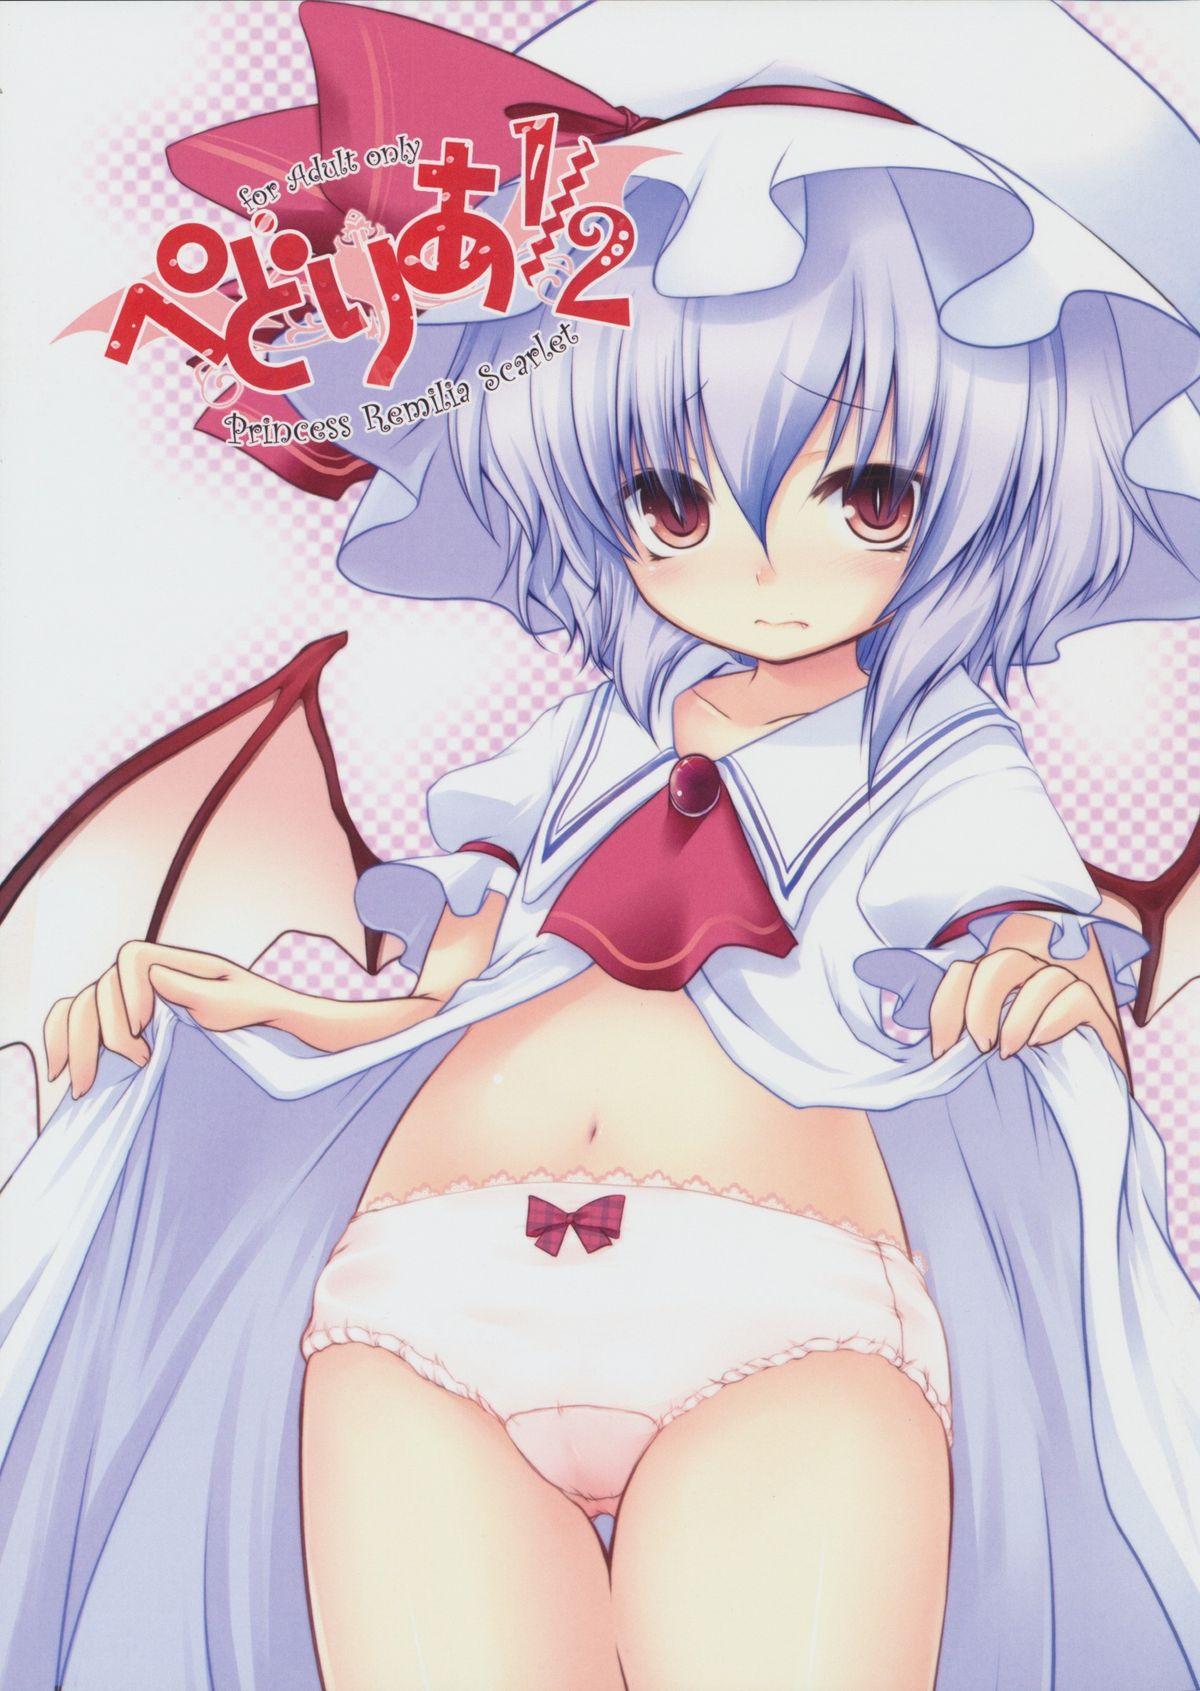 Riding Pedolia 1/2 Princess Remilia Scarlet - Touhou project Anal Fuck - Picture 1